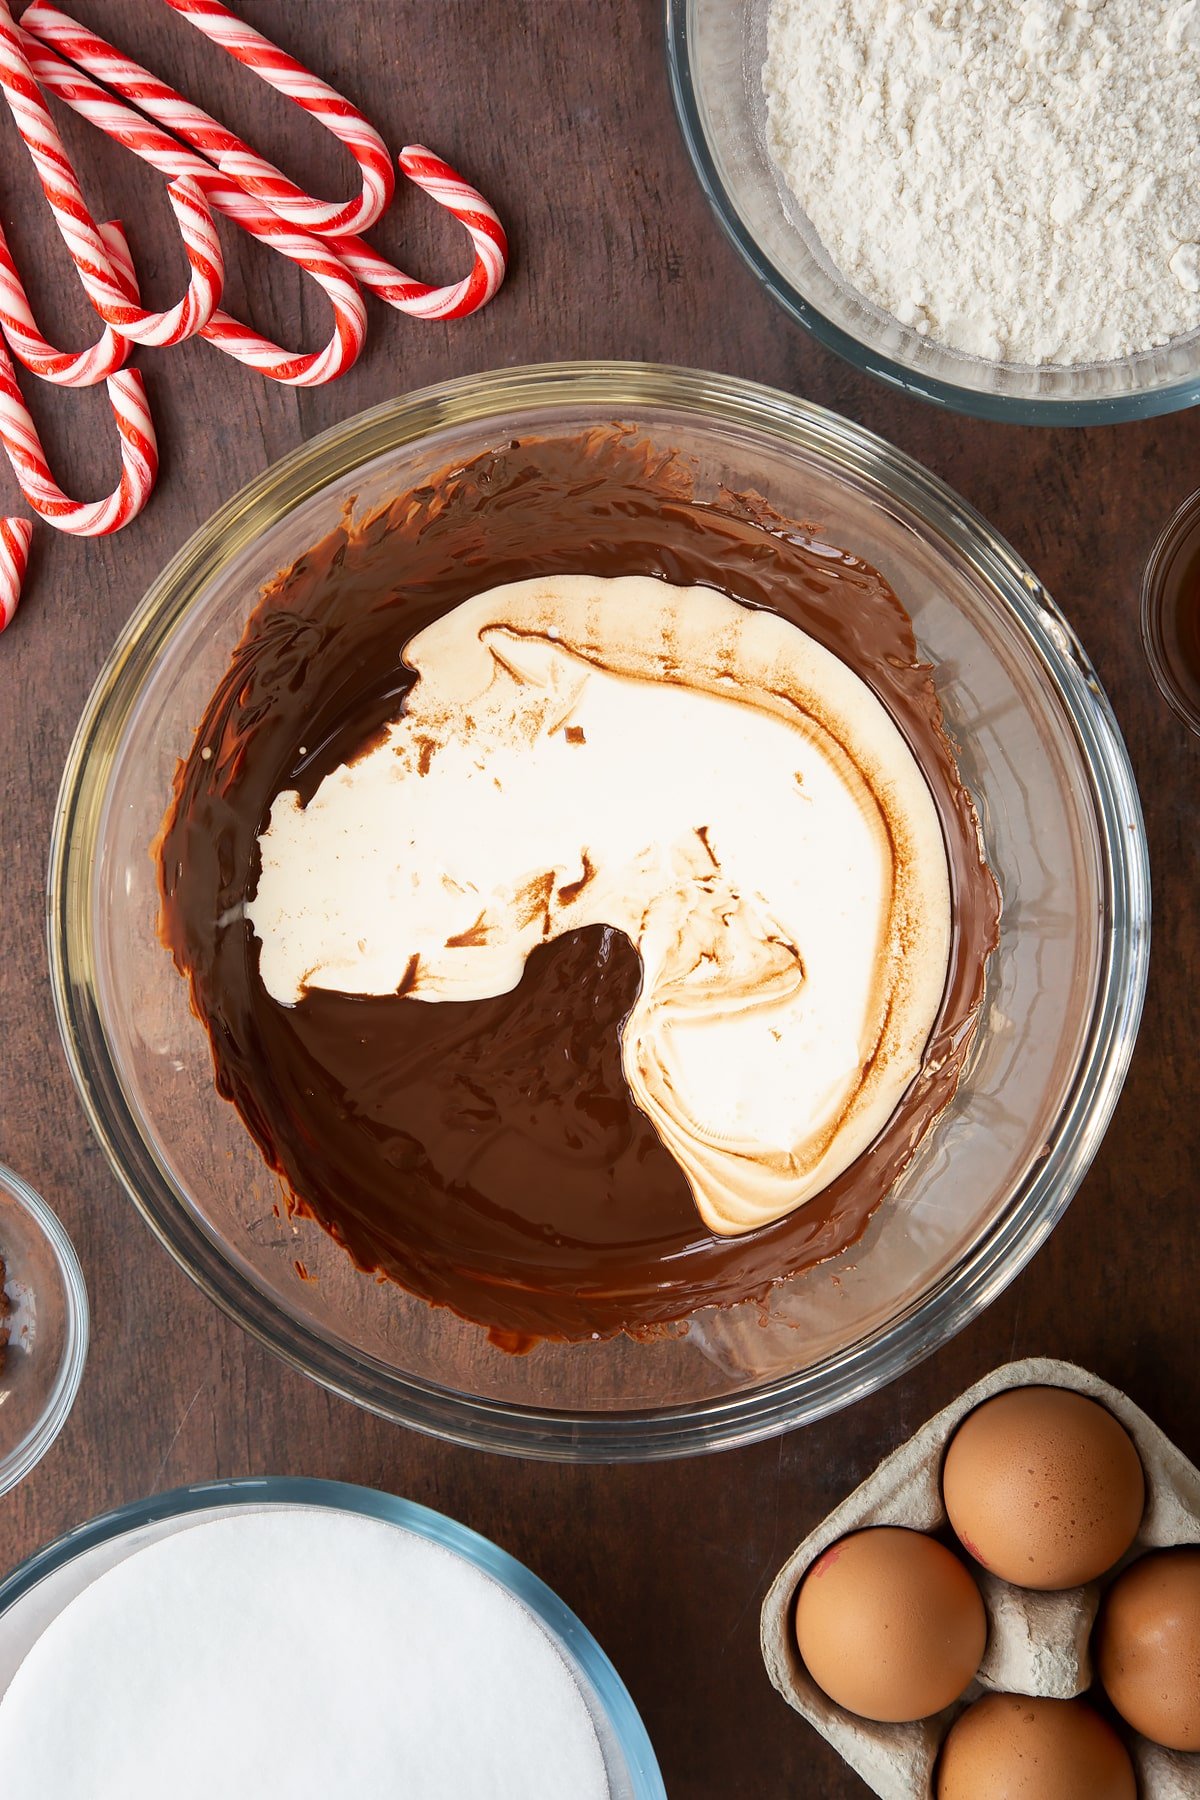 Melted dark chocolate and cream in a glass bowl. Ingredients to make Candy cane brownies surround the bowl.